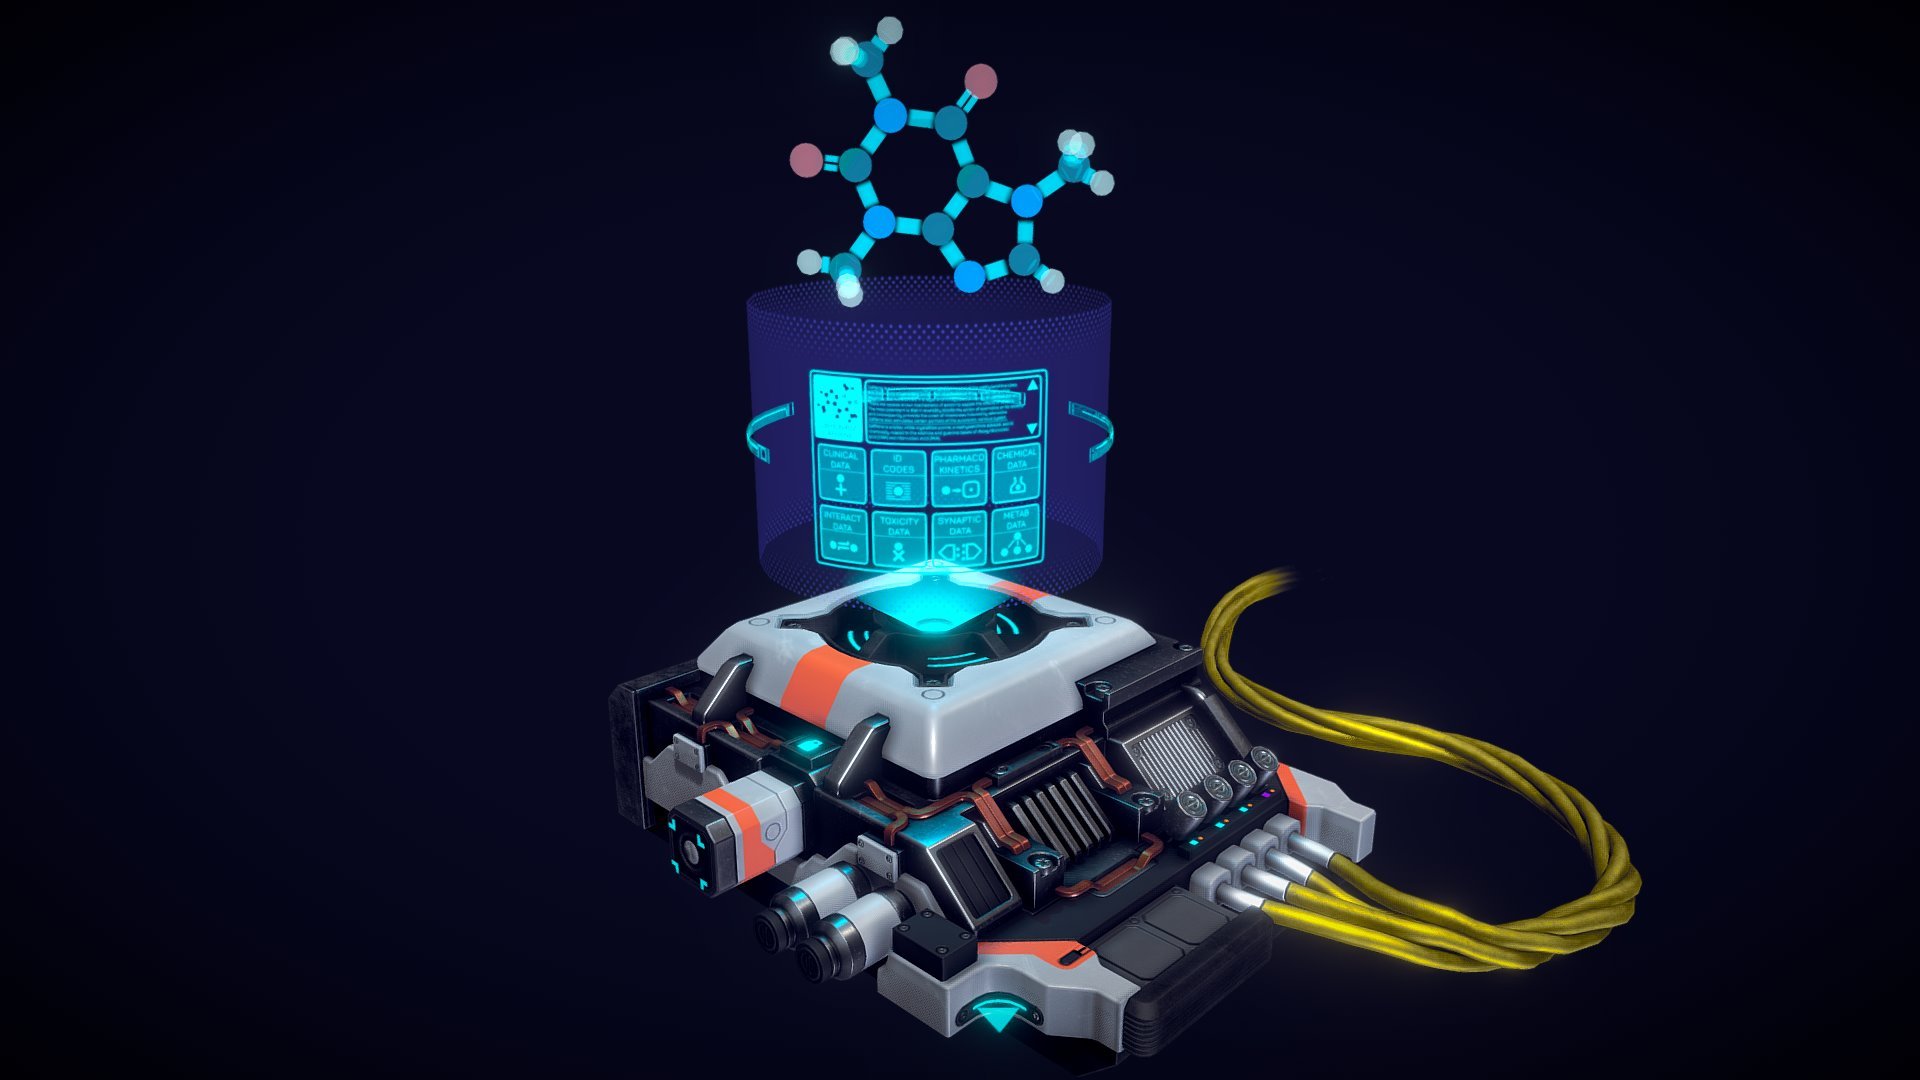 A futuristic themed piece of lab equipment, Modelled and animated in maya 2018, Textured in substance painter 2.

This is my first attempt at an animated model, love to hear your feedback! - Sci-Fi Analyzer unit - 3D model by Glennosaurus (@ghilby) 3d model